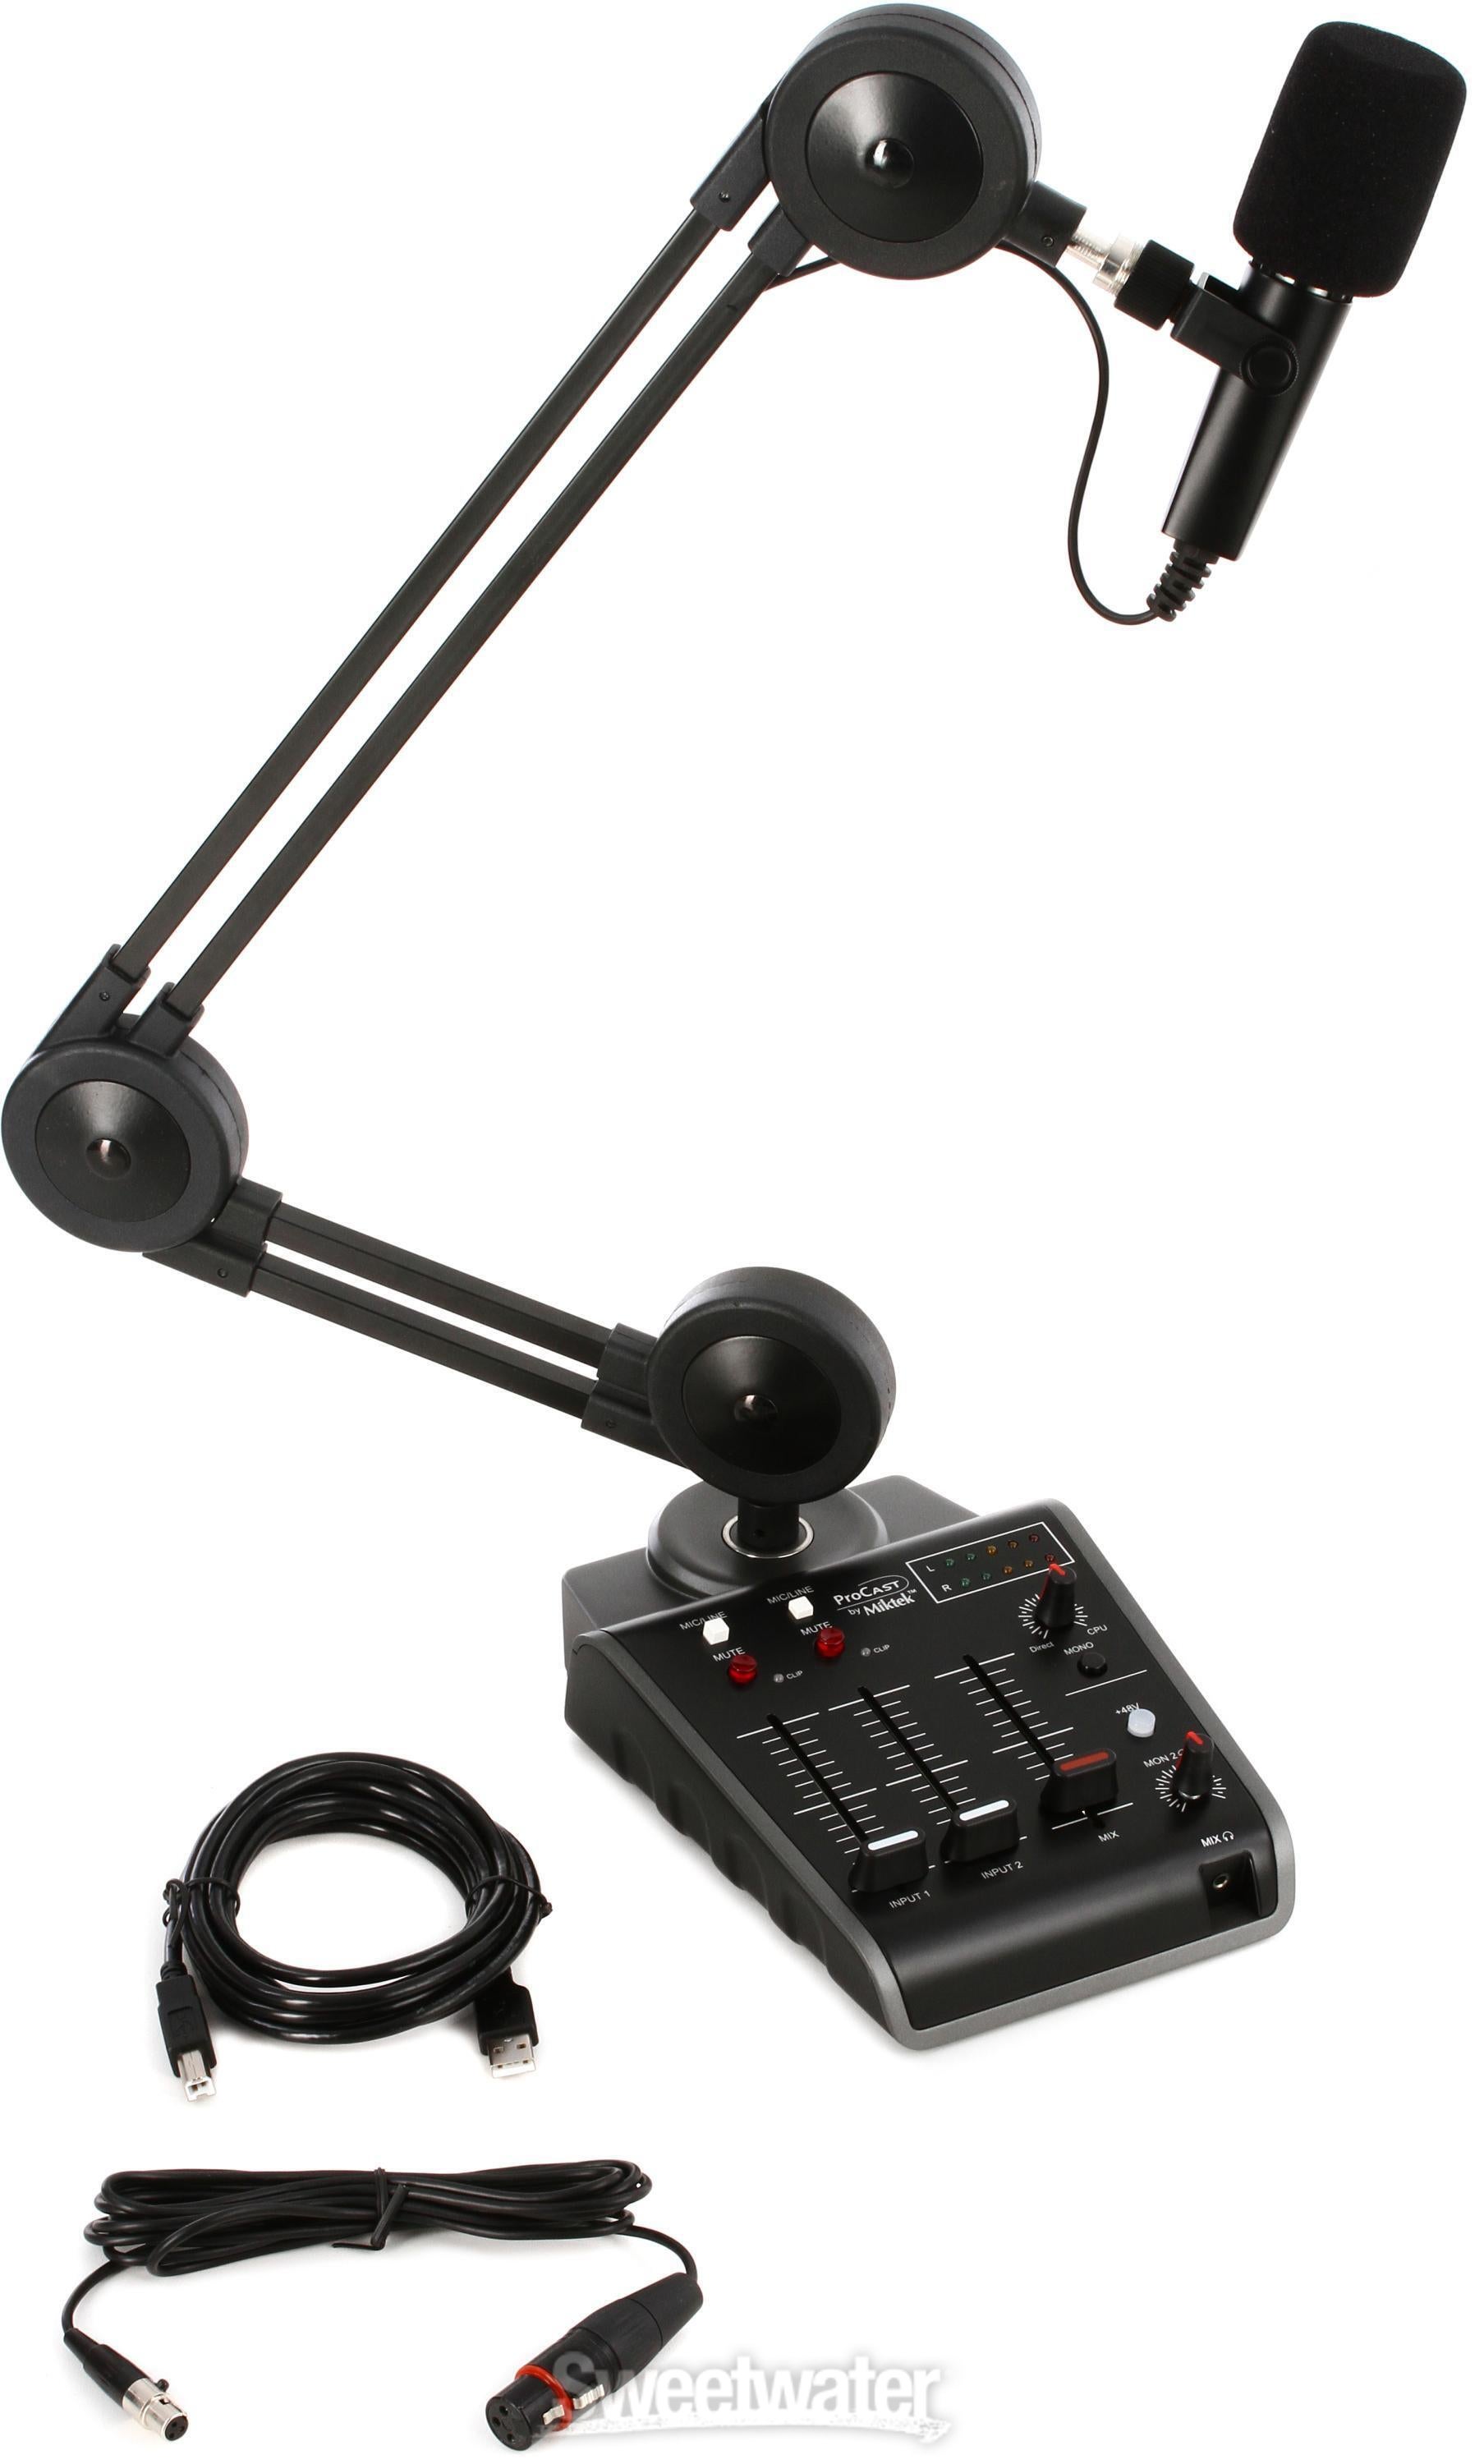 Miktek ProCast SST USB Broadcast Microphone with Mixer | Sweetwater